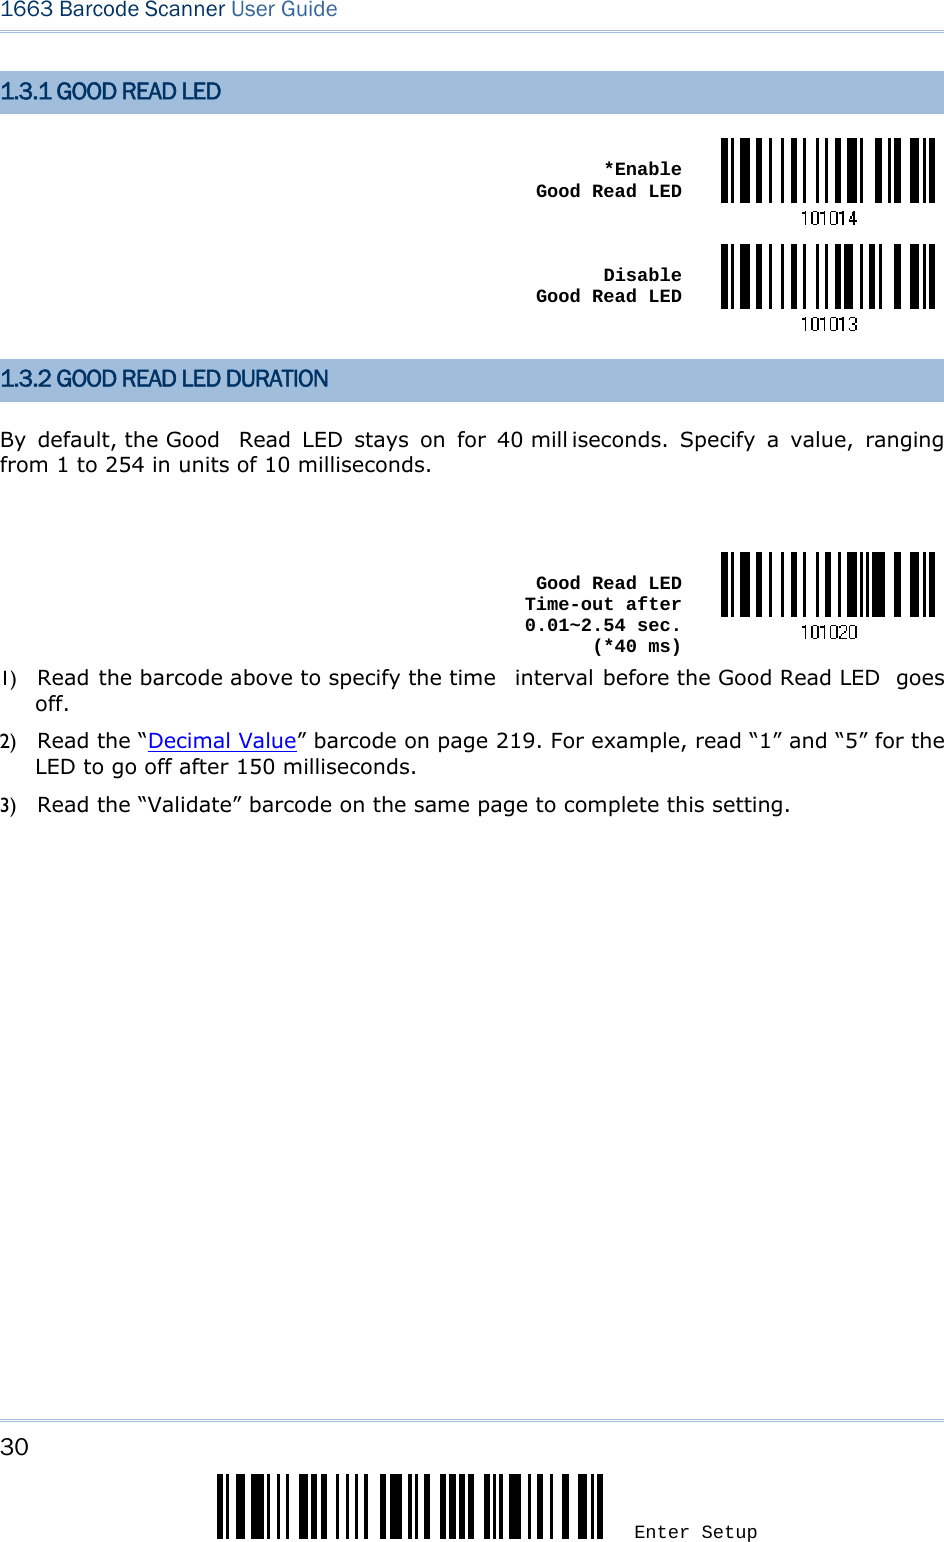 30 Enter Setup 1663 Barcode Scanner User Guide  1.3.1 GOOD READ LED  *Enable  Good Read LED Disable  Good Read LED 1.3.2 GOOD READ LED DURATION By default, the Good  Read LED stays on for 40 mill iseconds. Specify a value, ranging from 1 to 254 in units of 10 milliseconds.   Good Read LED Time-out after 0.01~2.54 sec.  (*40 ms)1) Read the barcode above to specify the time  interval before the Good Read LED  goes off. 2) Read the “Decimal Value” barcode on page 219. For example, read “1” and “5” for the LED to go off after 150 milliseconds.   3) Read the “Validate” barcode on the same page to complete this setting.  